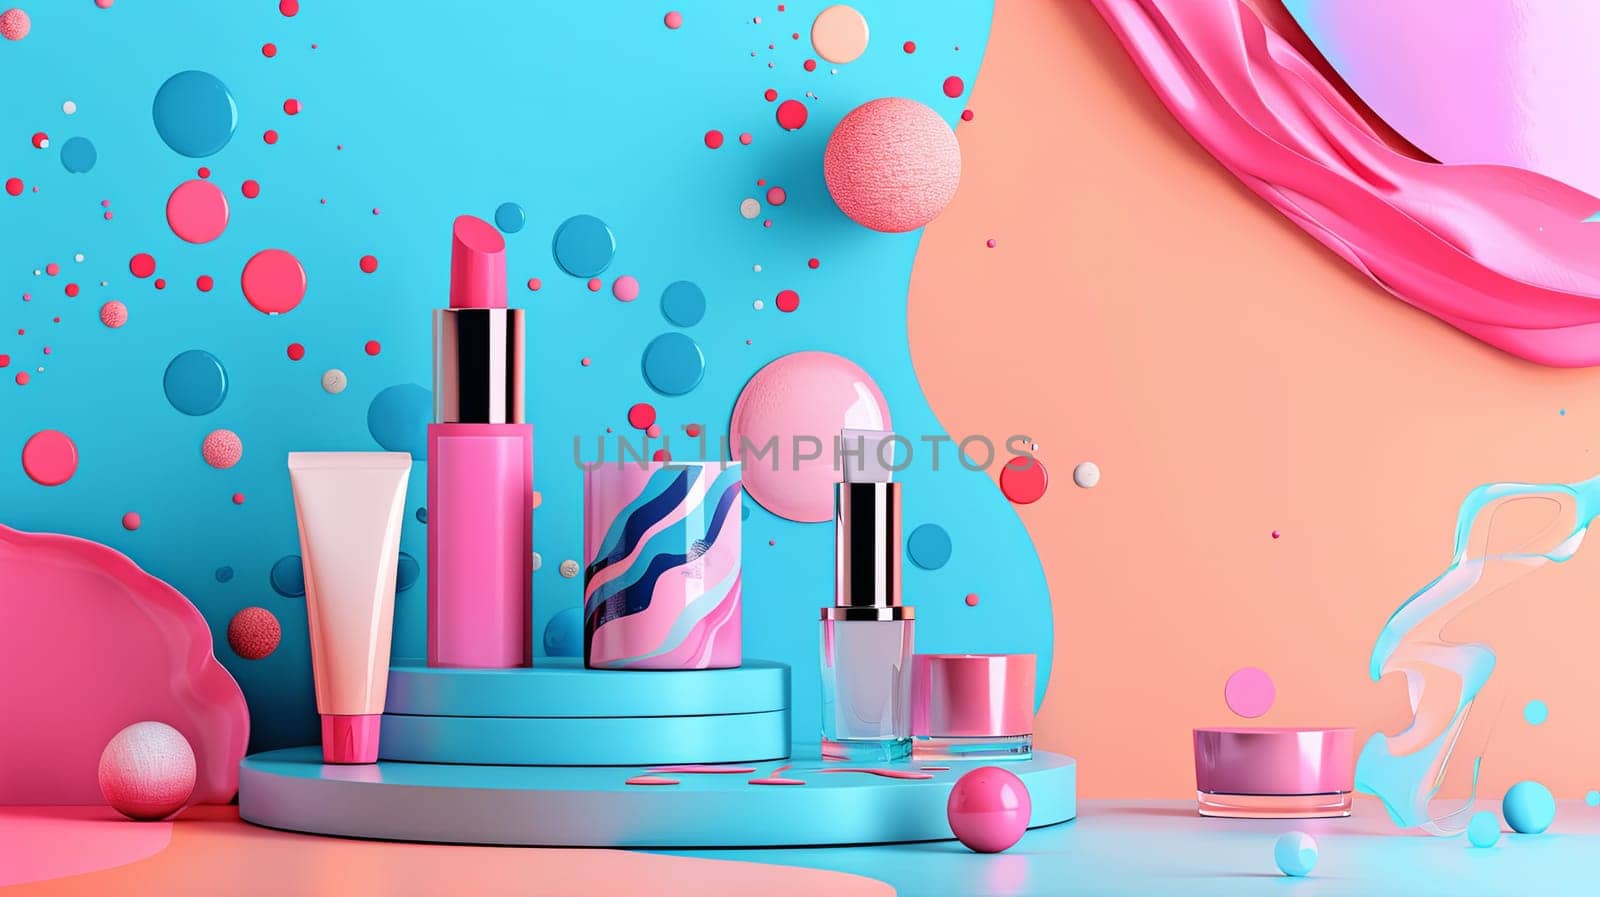 A blue and pink shelf filled with assorted cosmetics including makeup, skincare products, and beauty tools.